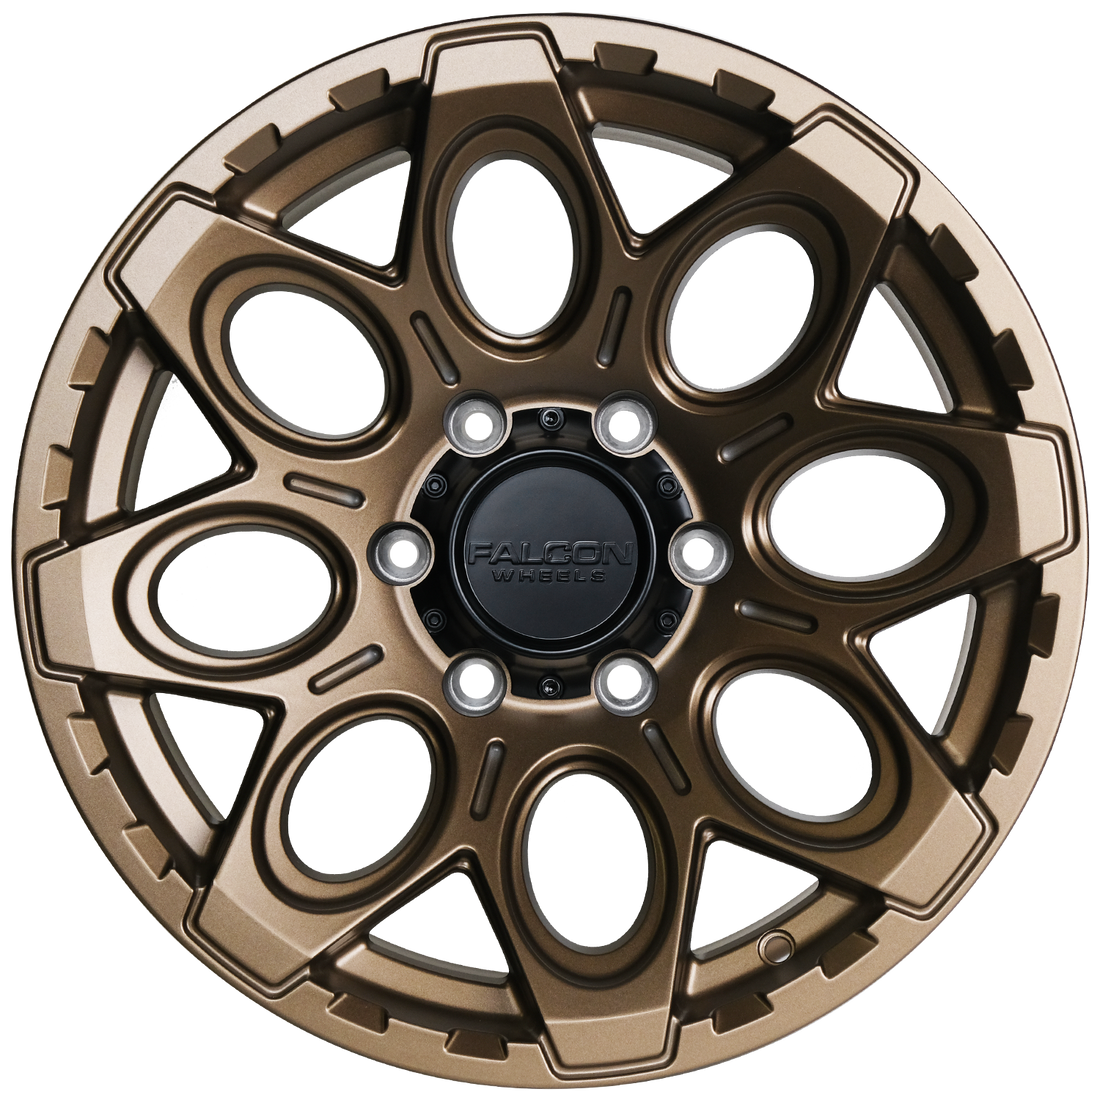 Falcon Wheels T6 17x9 in Matte Bronze - Roam Overland Outfitters